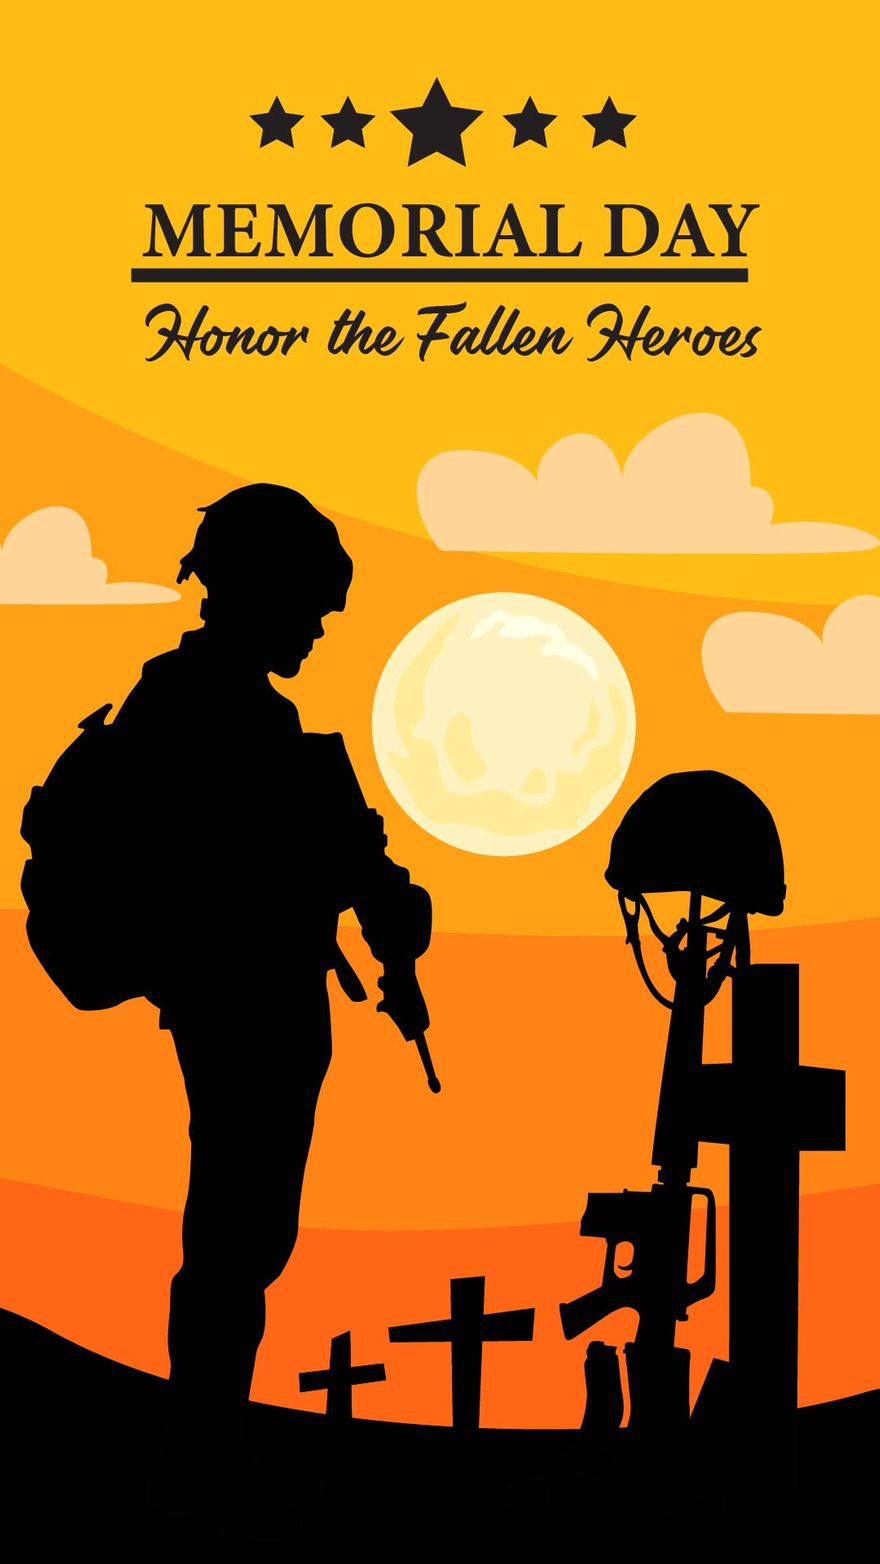 Free Memorial Day iPhone Background in PDF, Illustrator, PSD, EPS, SVG, JPG, PNG